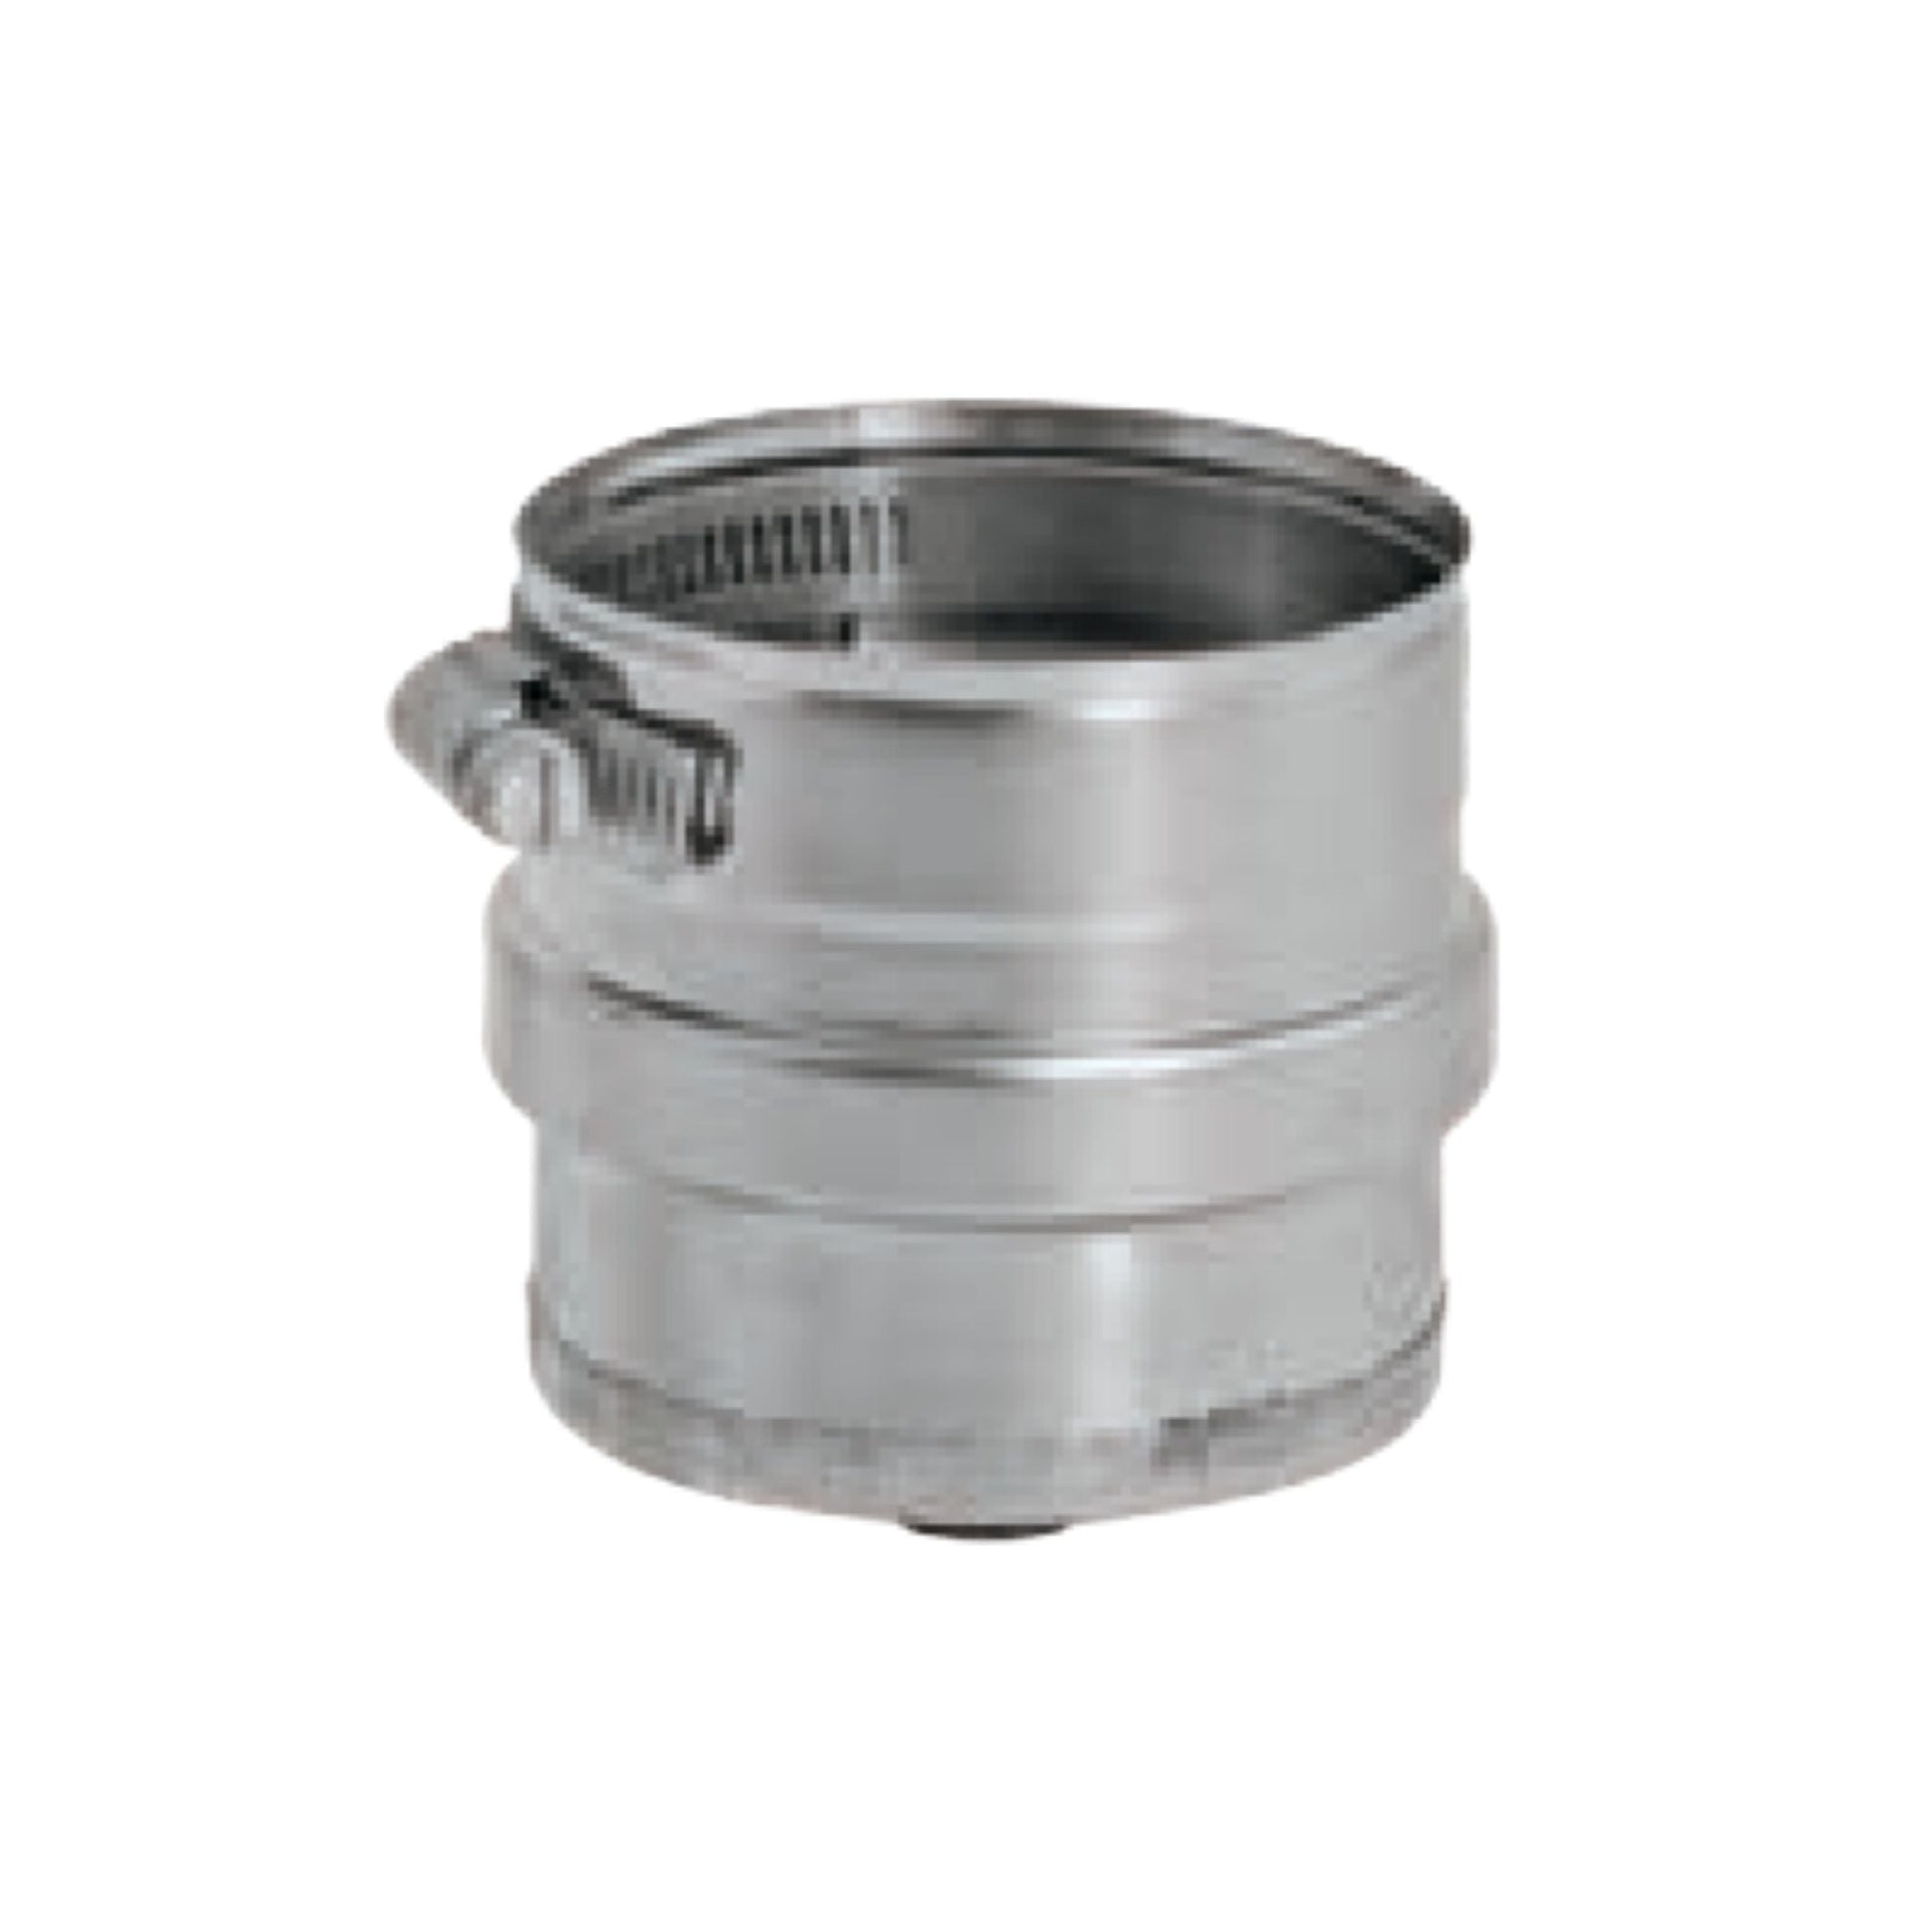 DuraVent FasNSeal 3" 316L Stainless Steel Drain Fitting